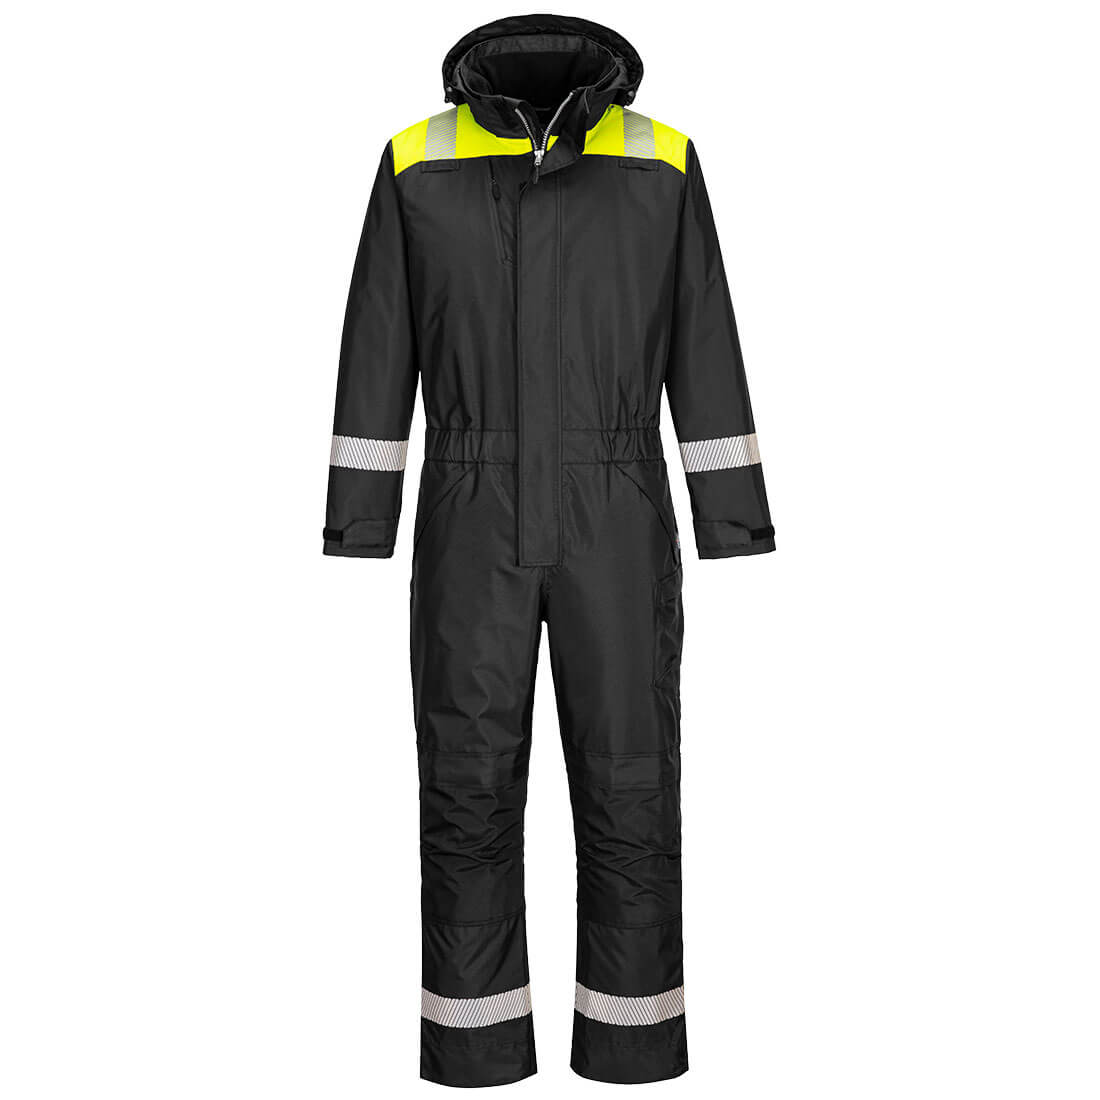 PW3 Winter Coverall - arbeitskleidung-gmbh